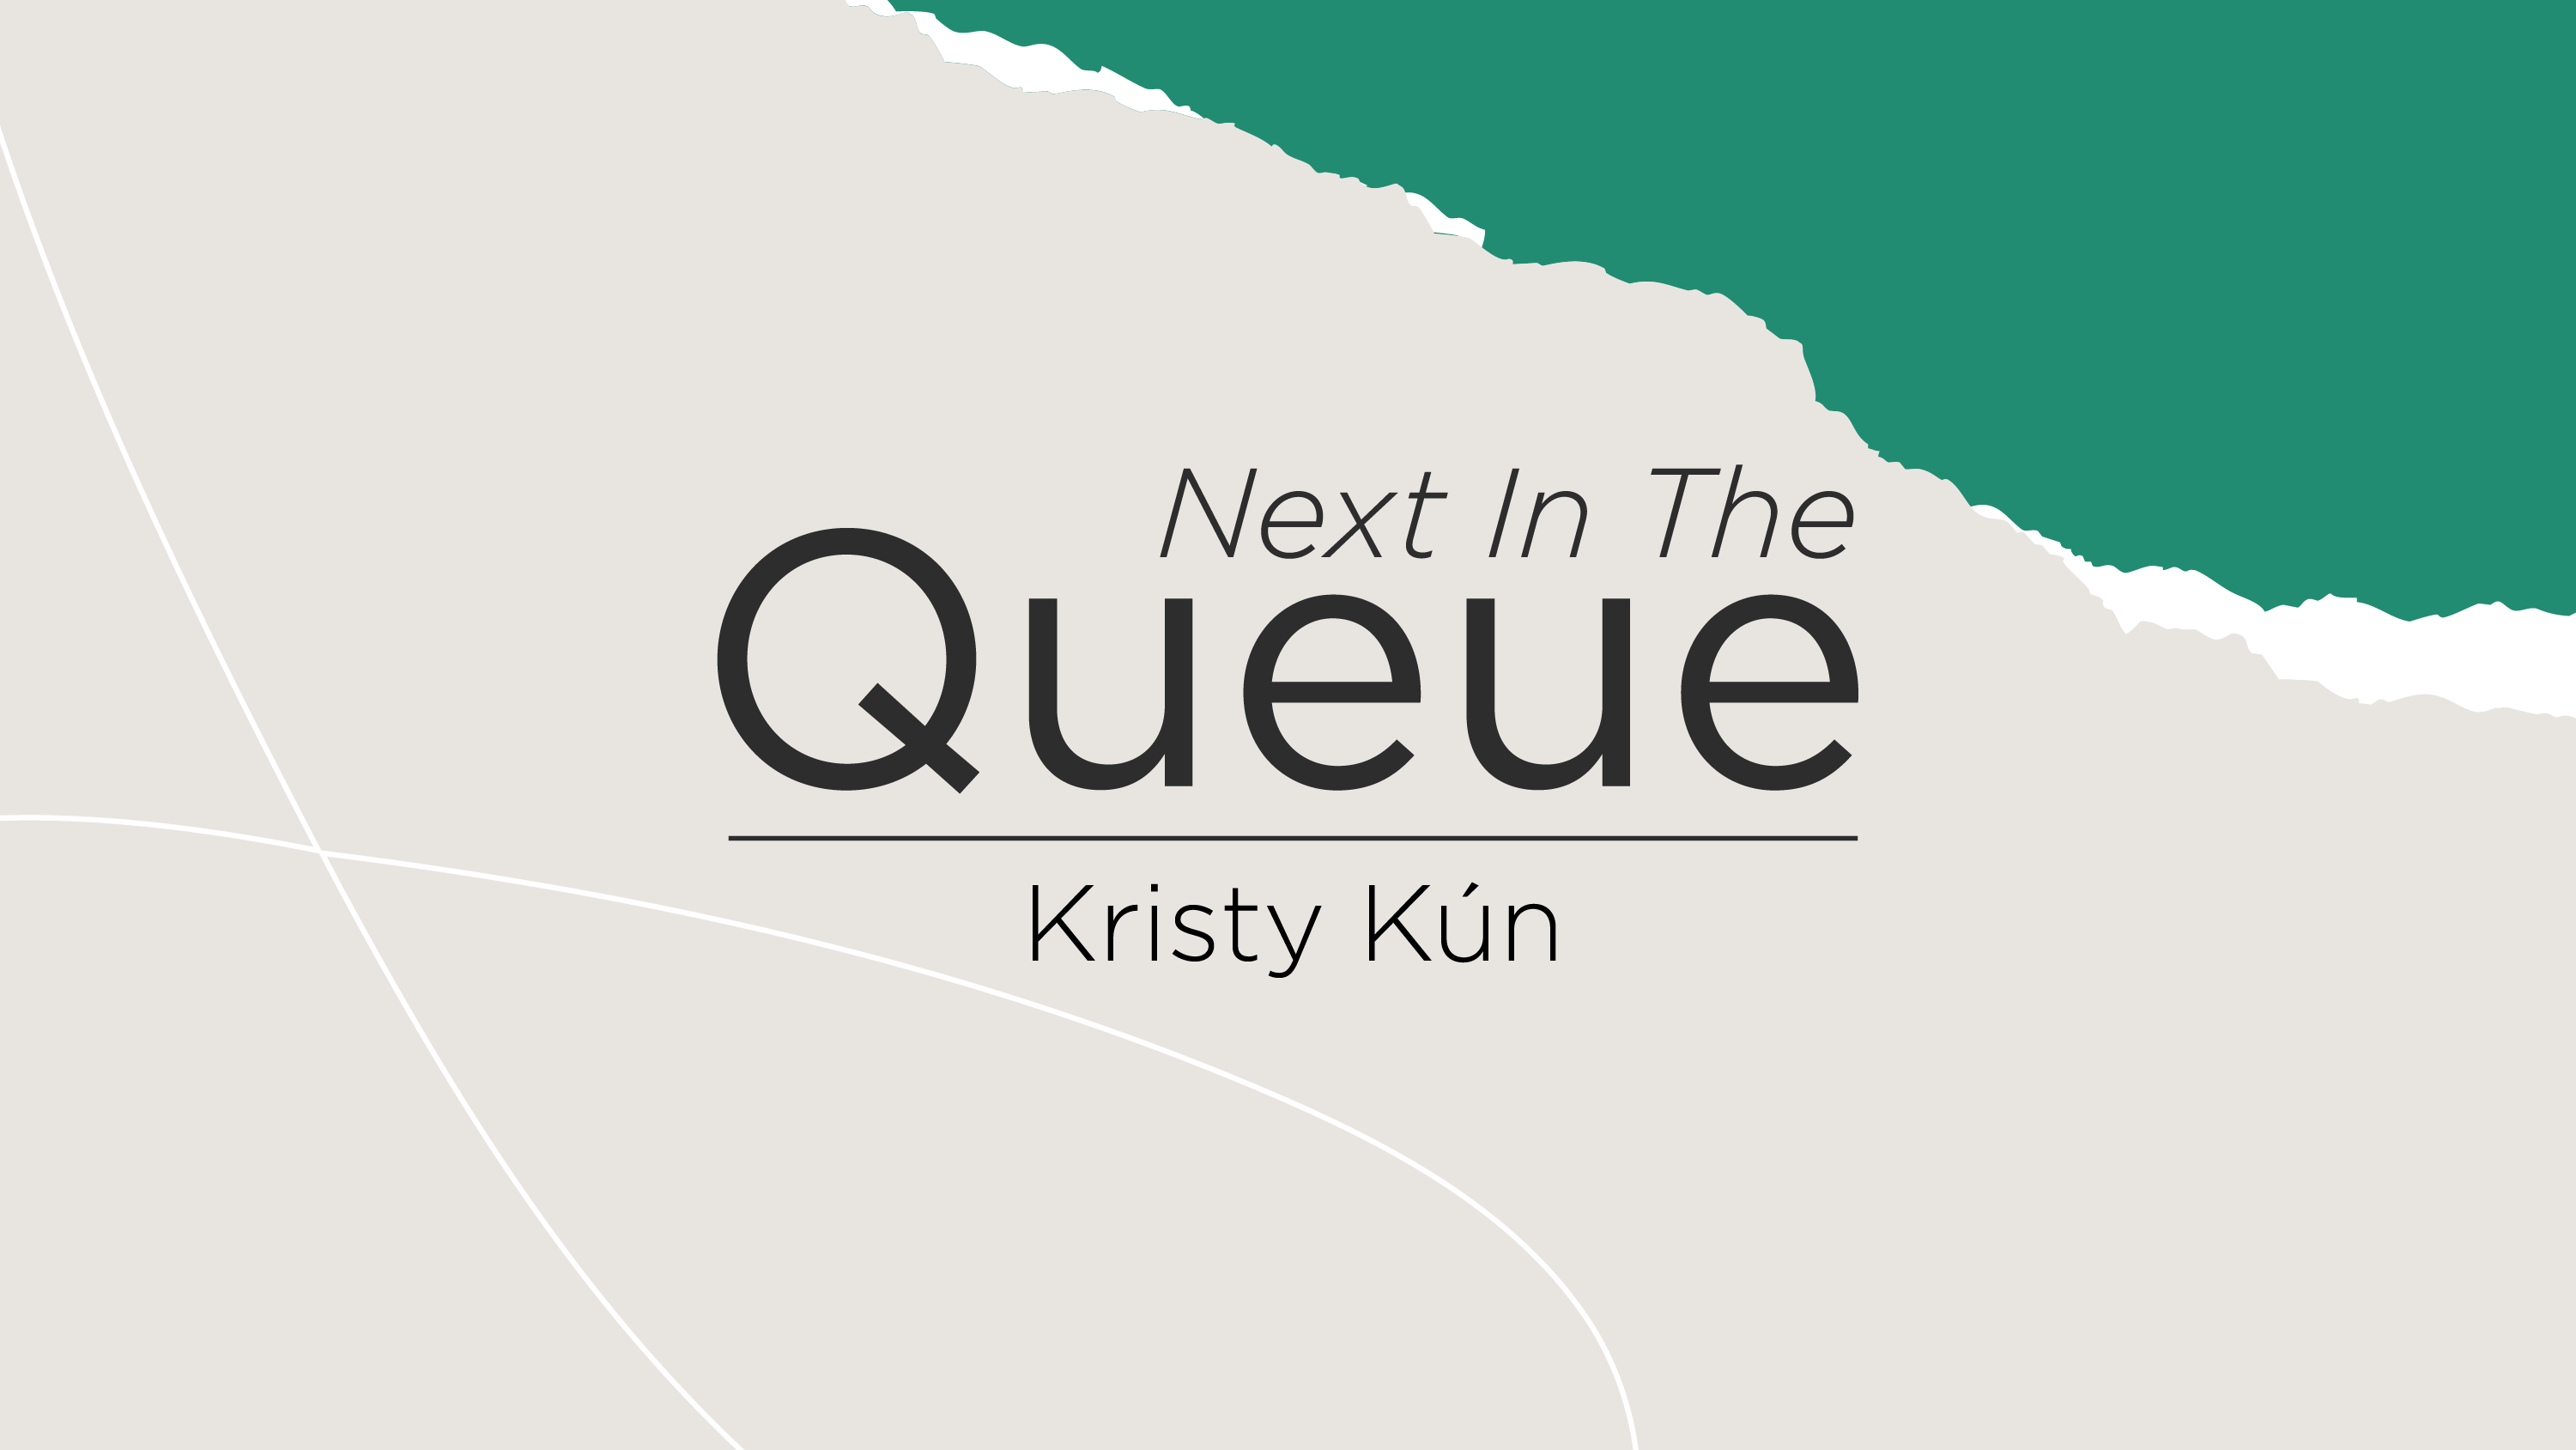 blog post cover graphic for The Queue featuring Kristy Kun